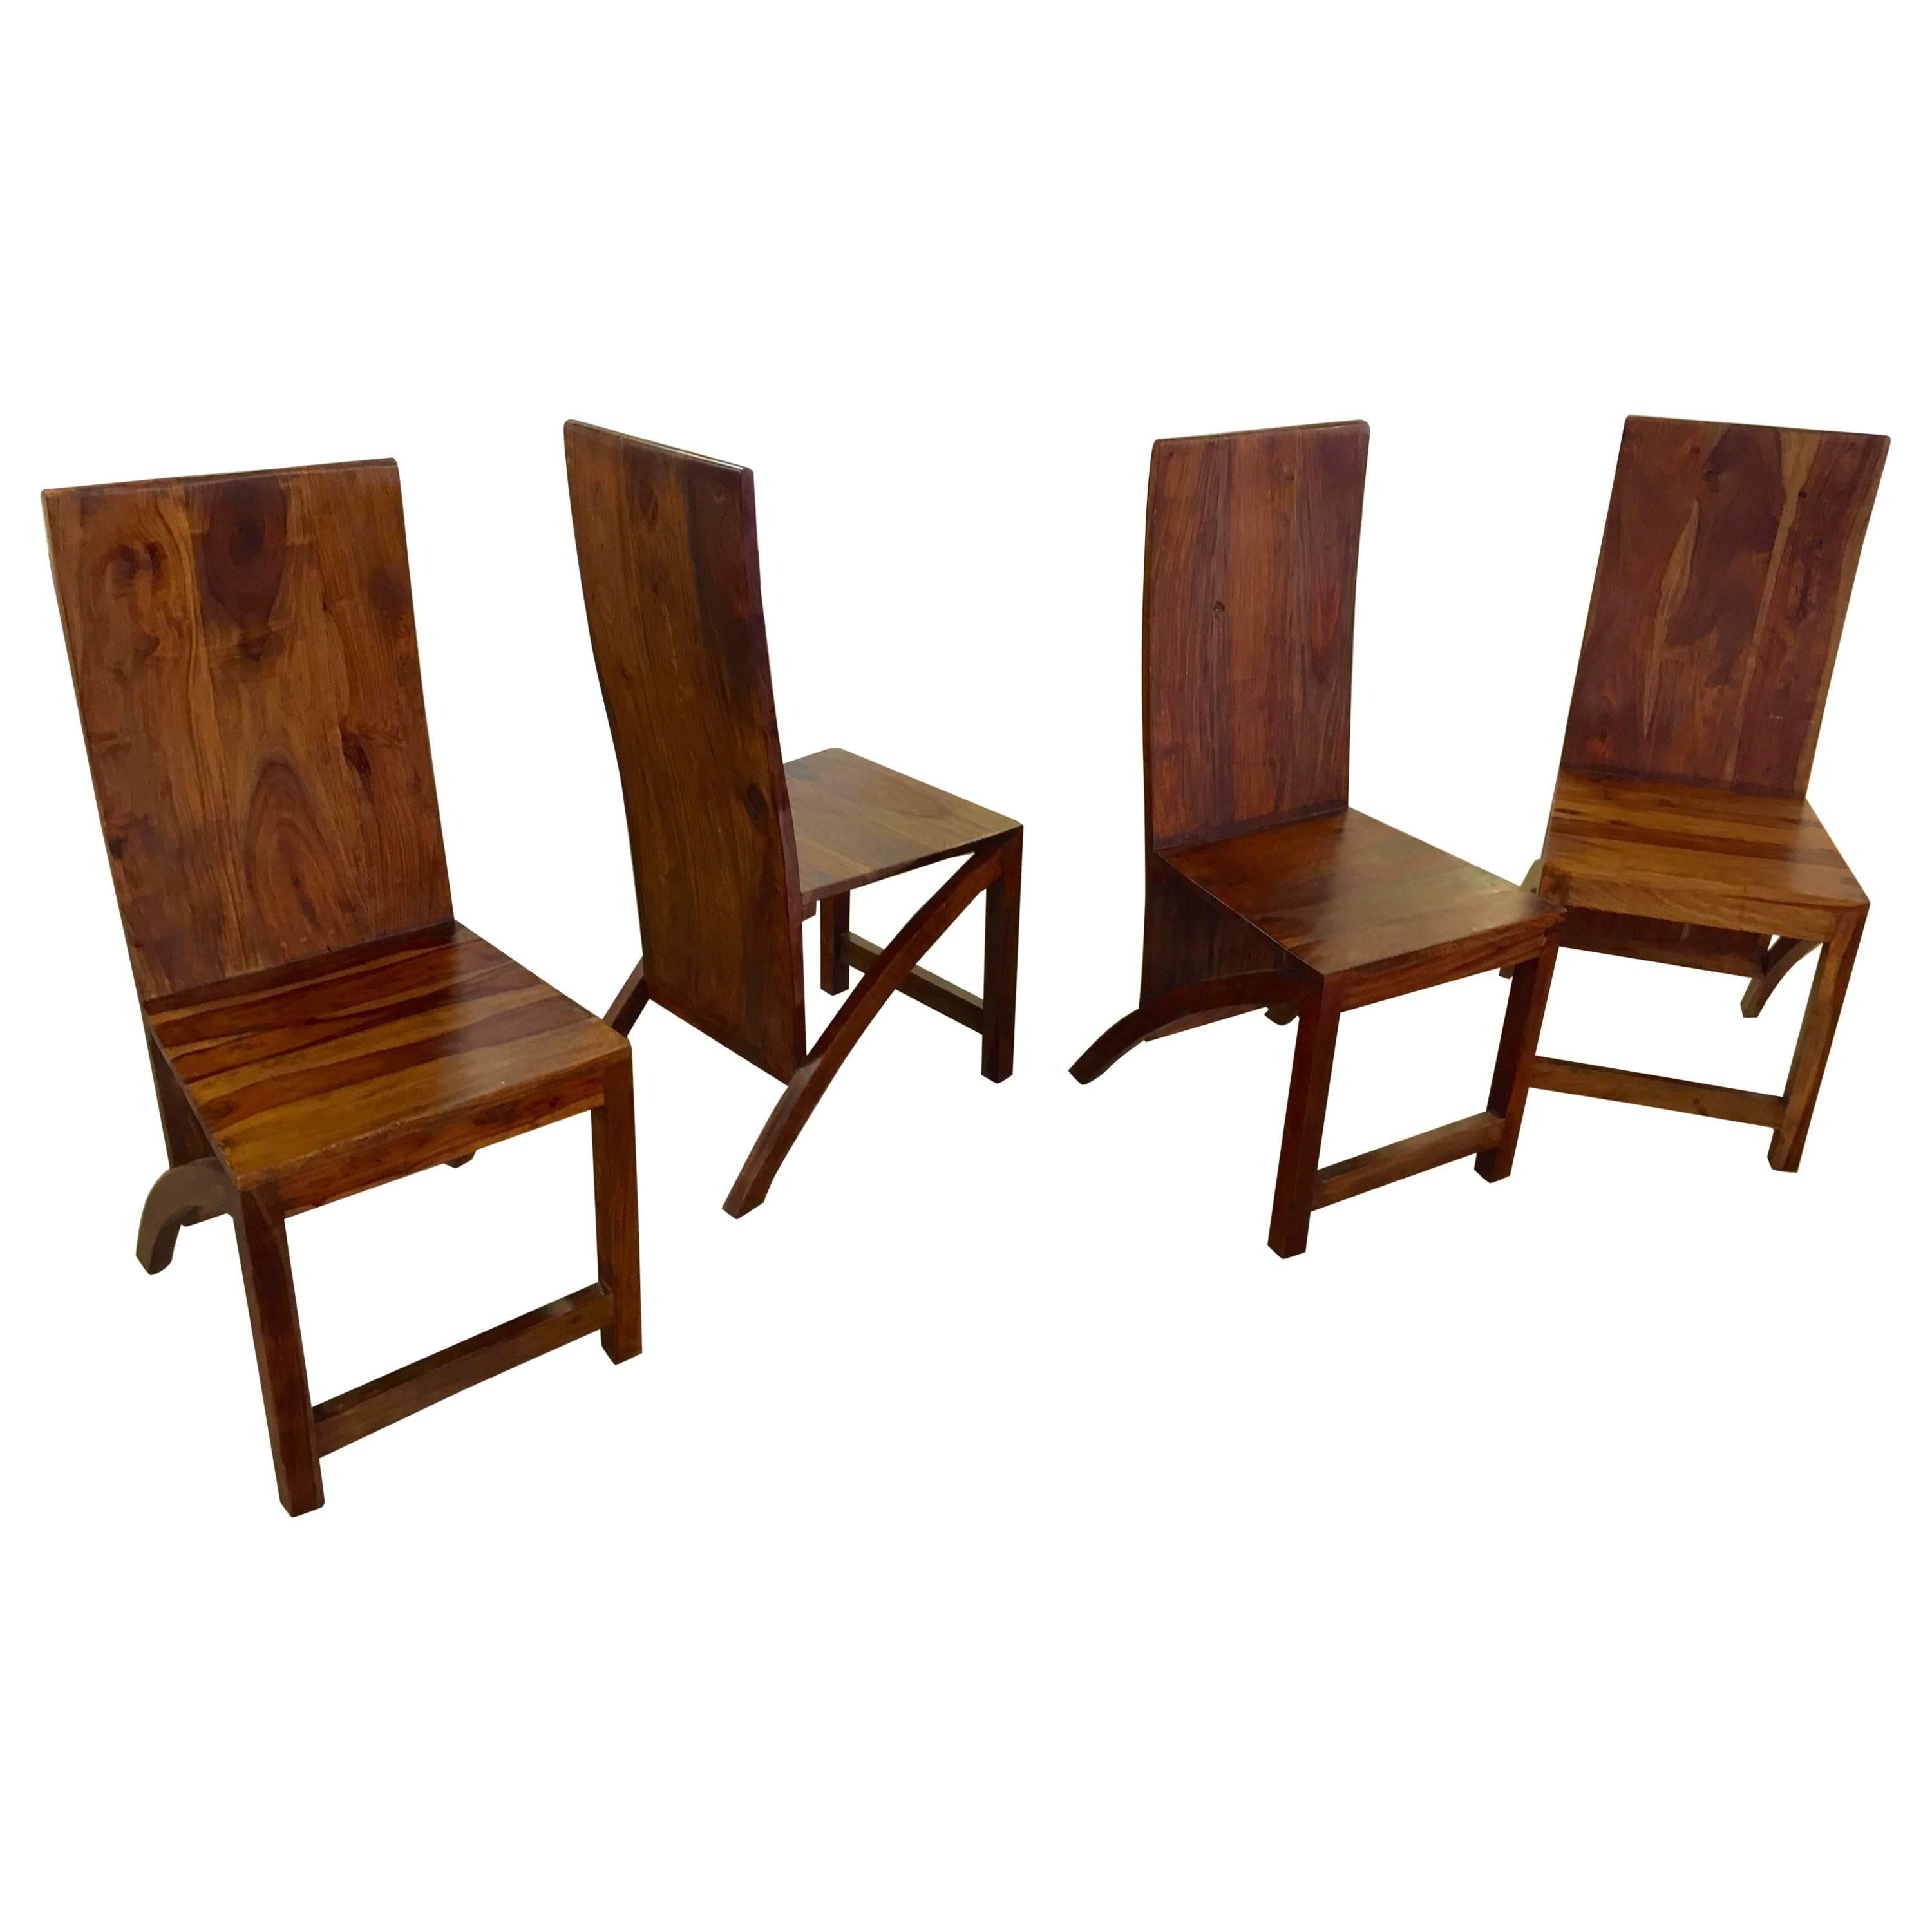 Set of Four Sculptural Exotic Wood Handmade Chairs